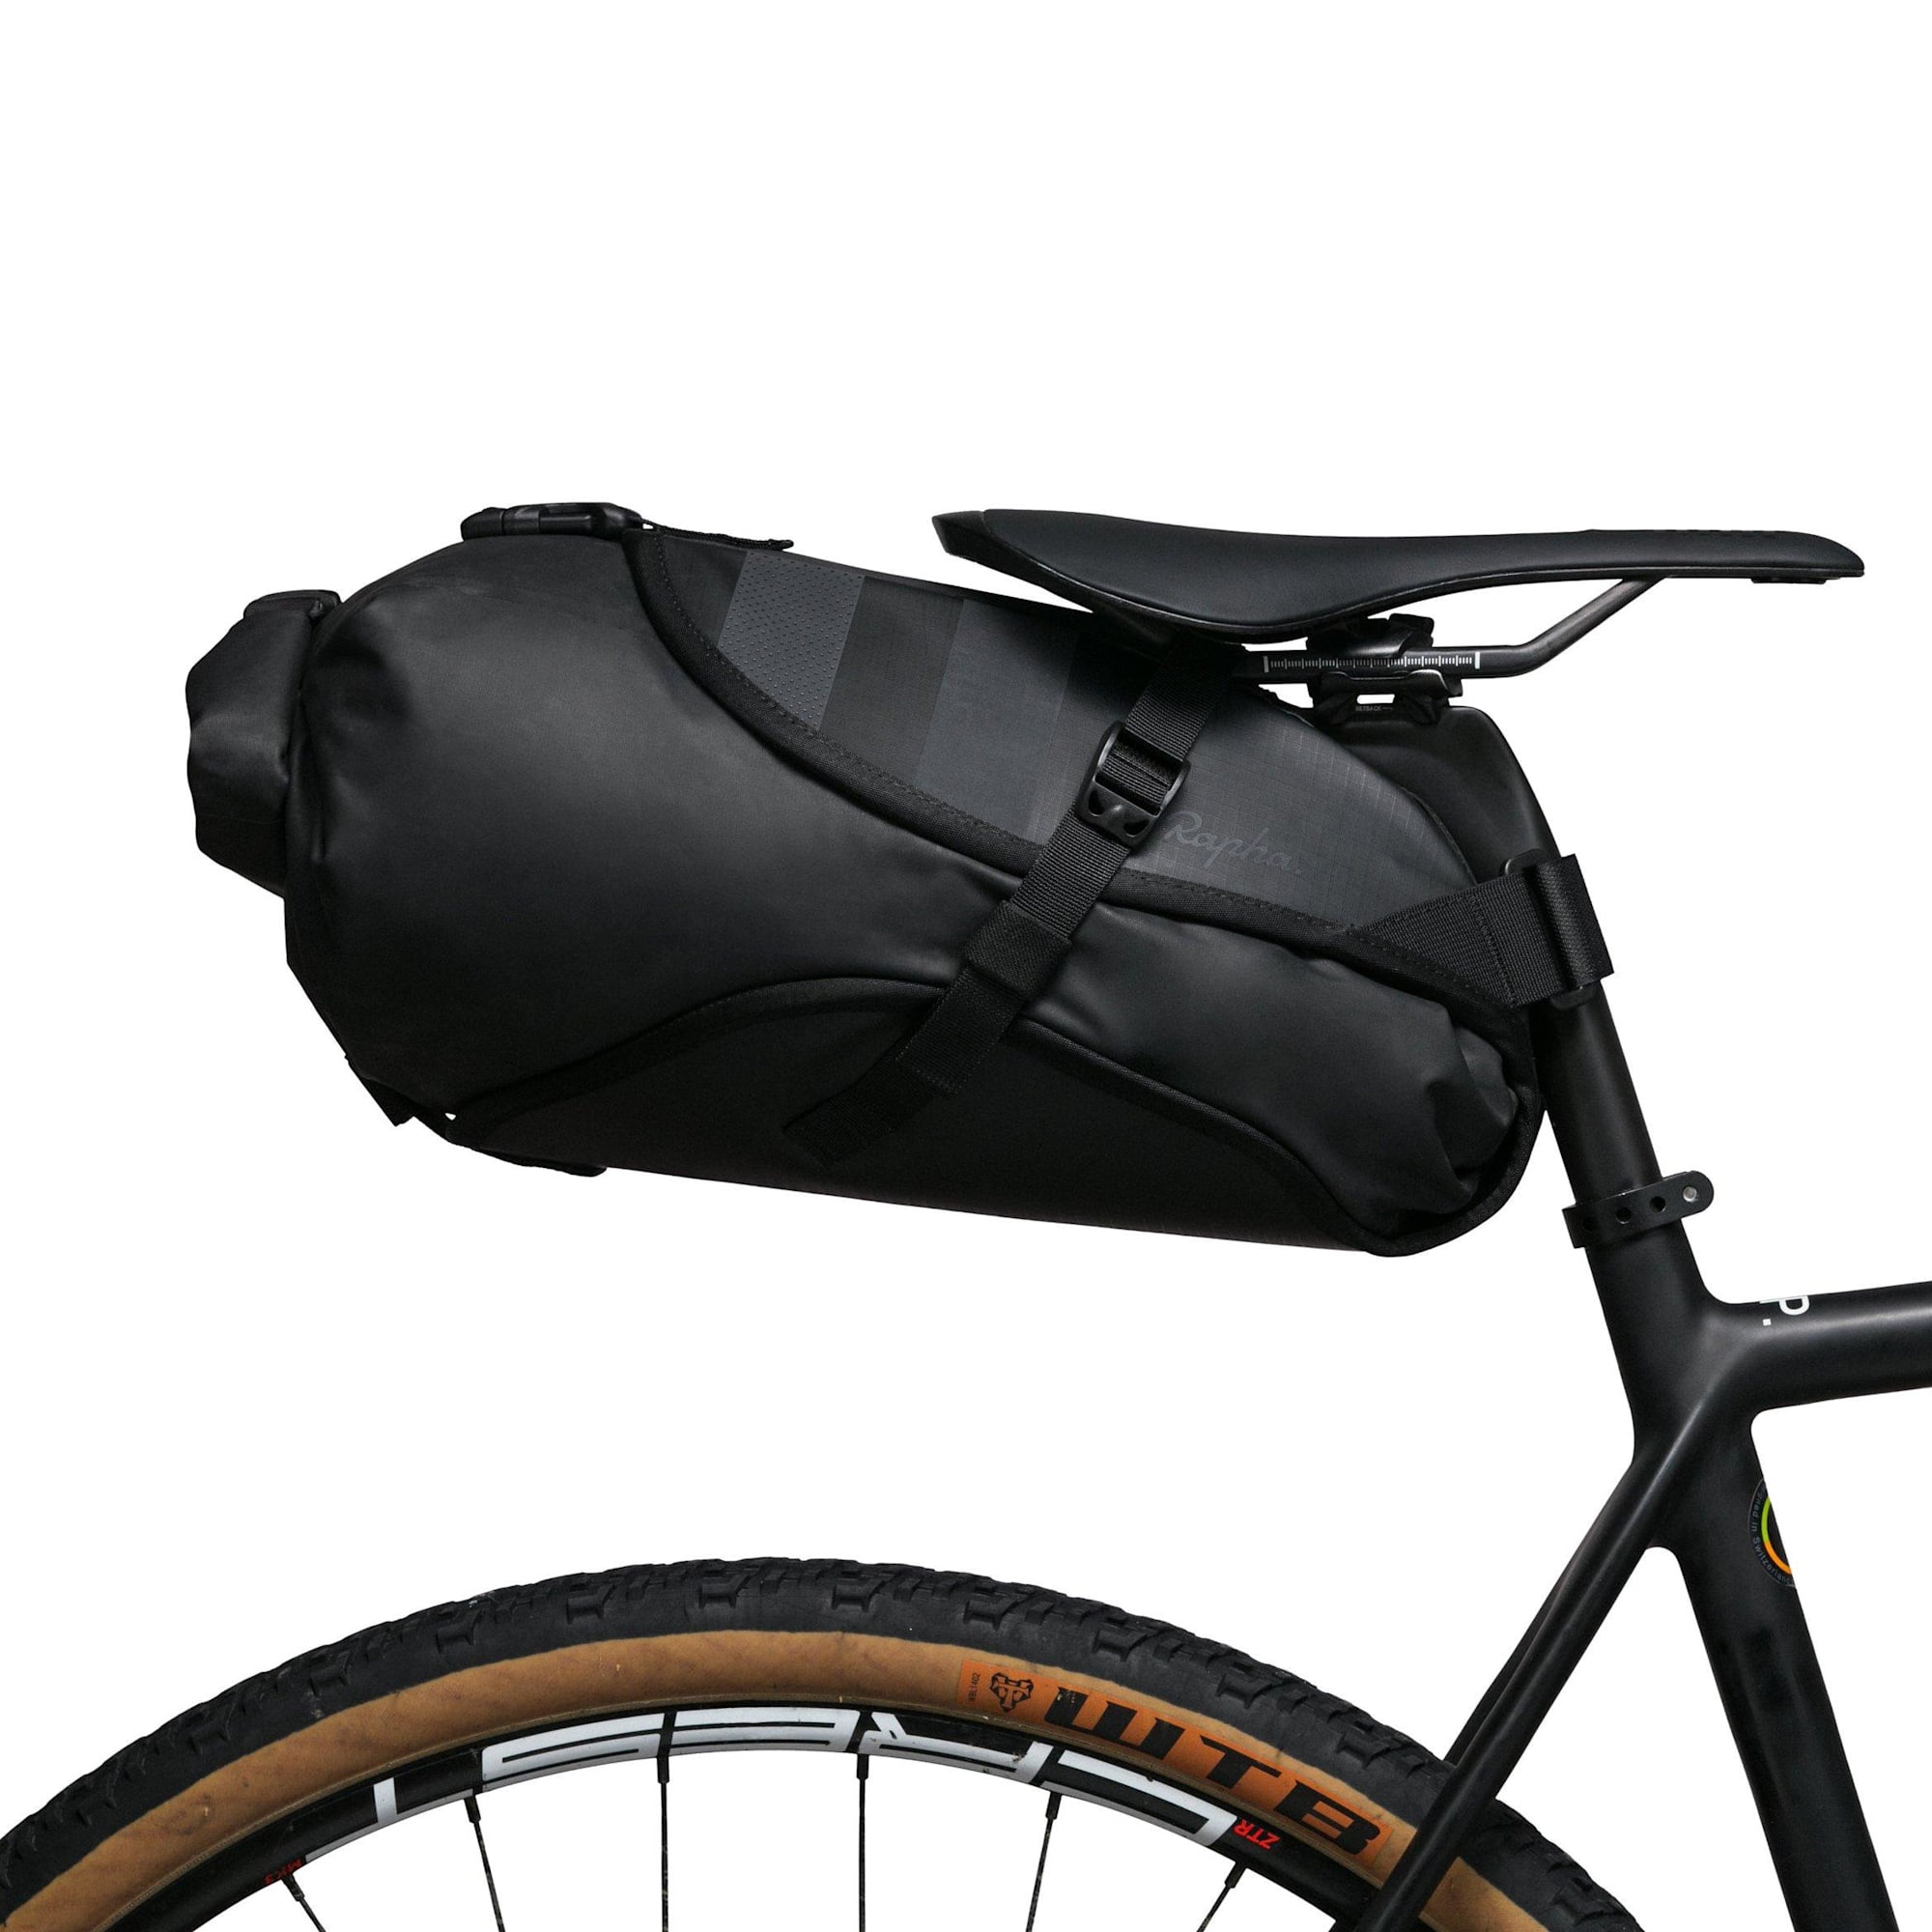 In the bag | Rapha